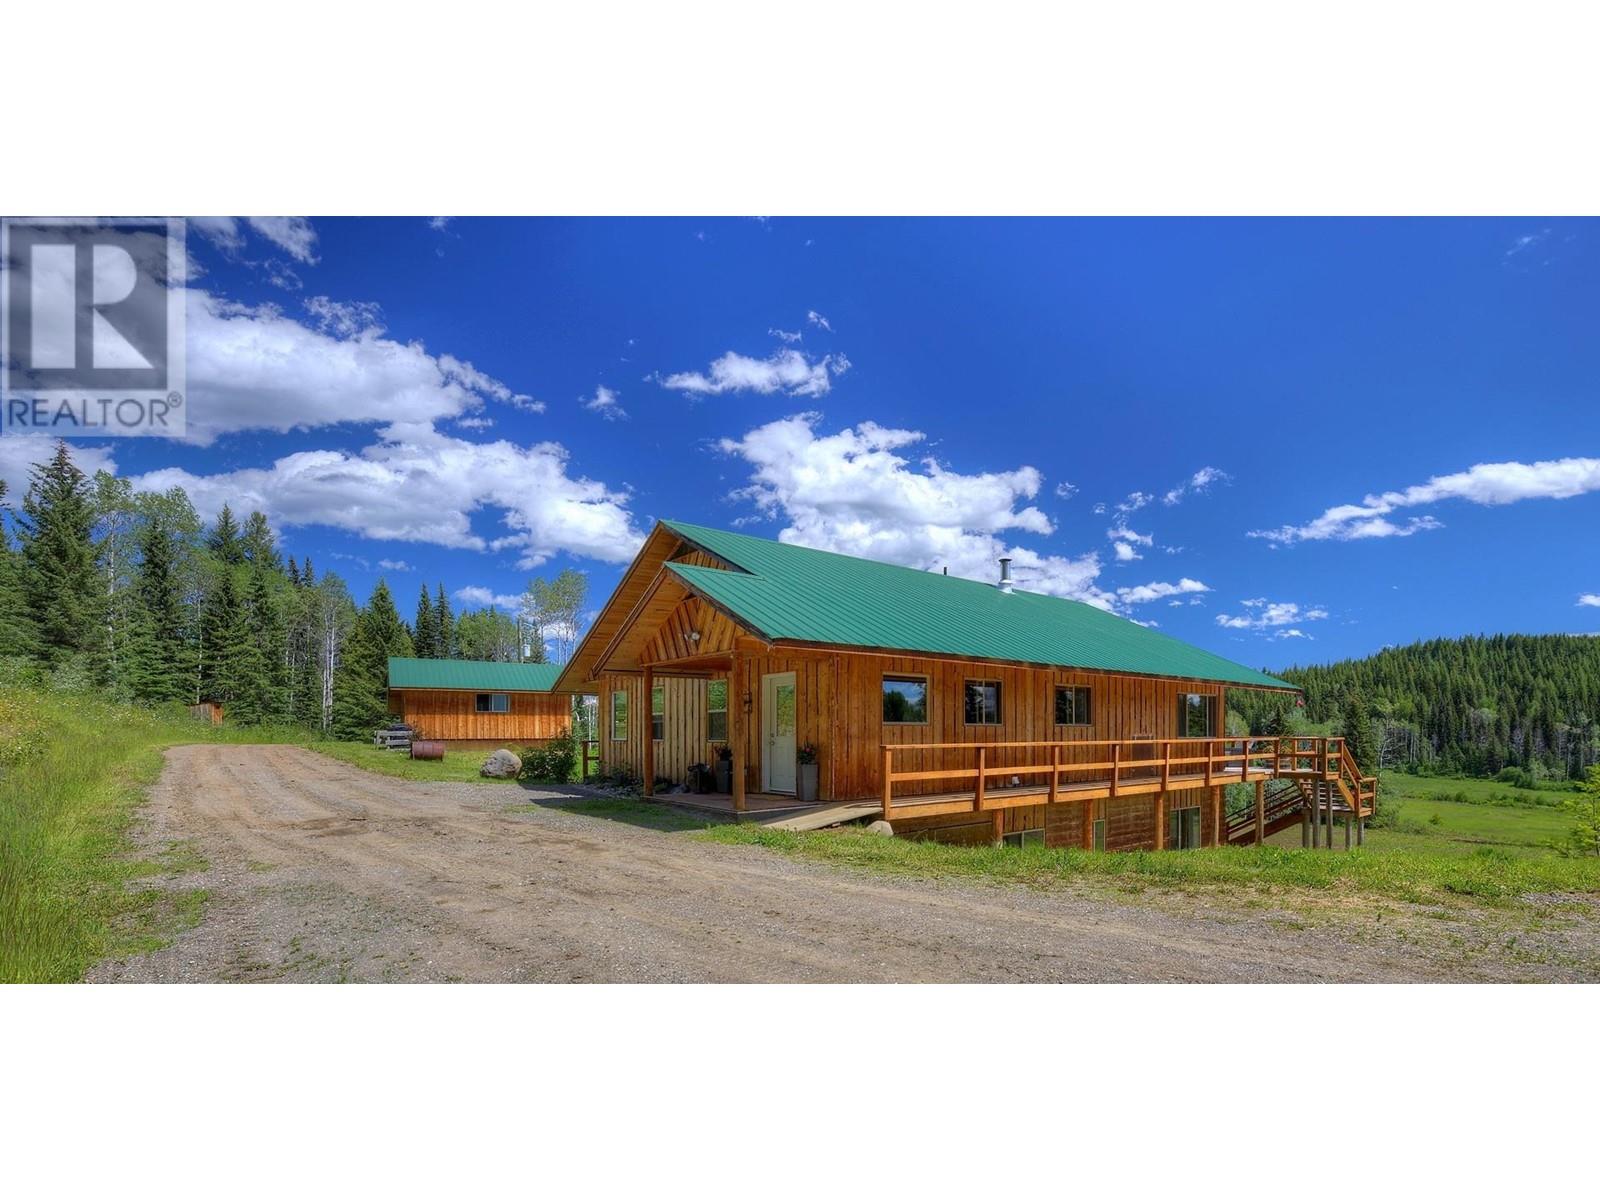 4626 TEASDALE ROAD located in Horsefly, British Columbia